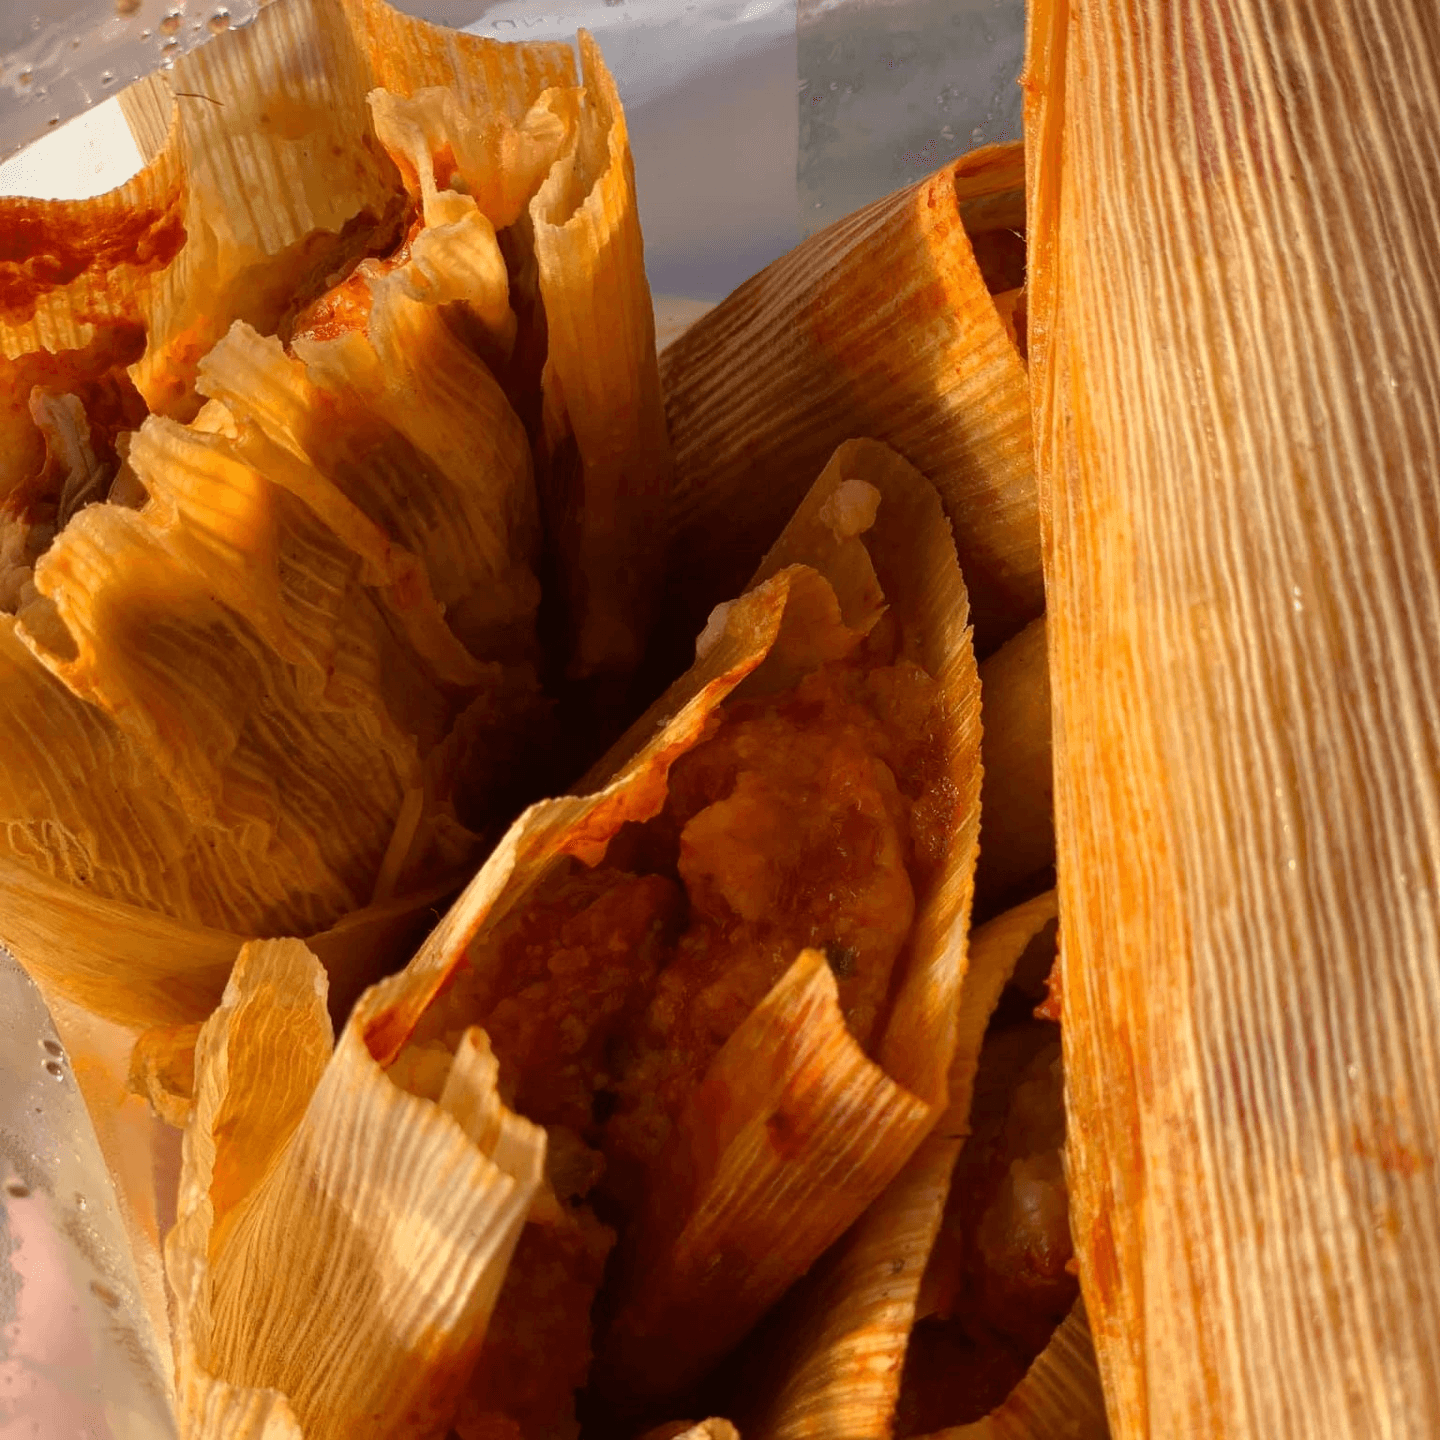 Satisfy Cravings with Our Mouthwatering Tamales